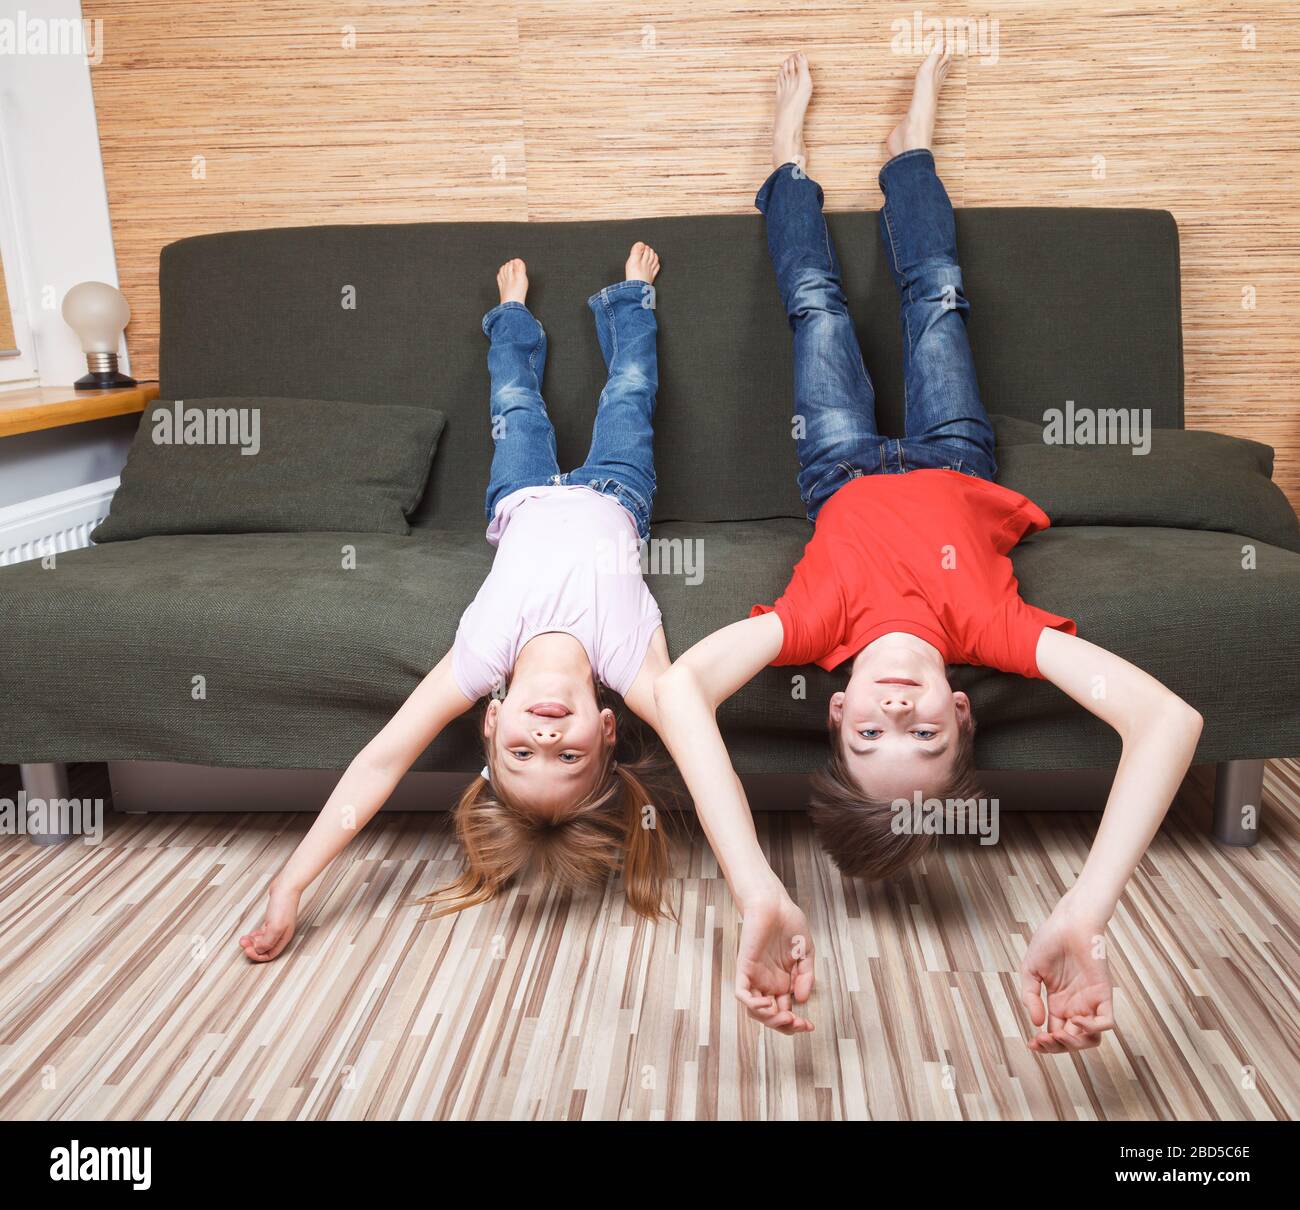 Siblings laying on couch stuck at home being in self-isolation. Quarantine and lockdown protective measures against spreading of coronavirus pandemic Stock Photo